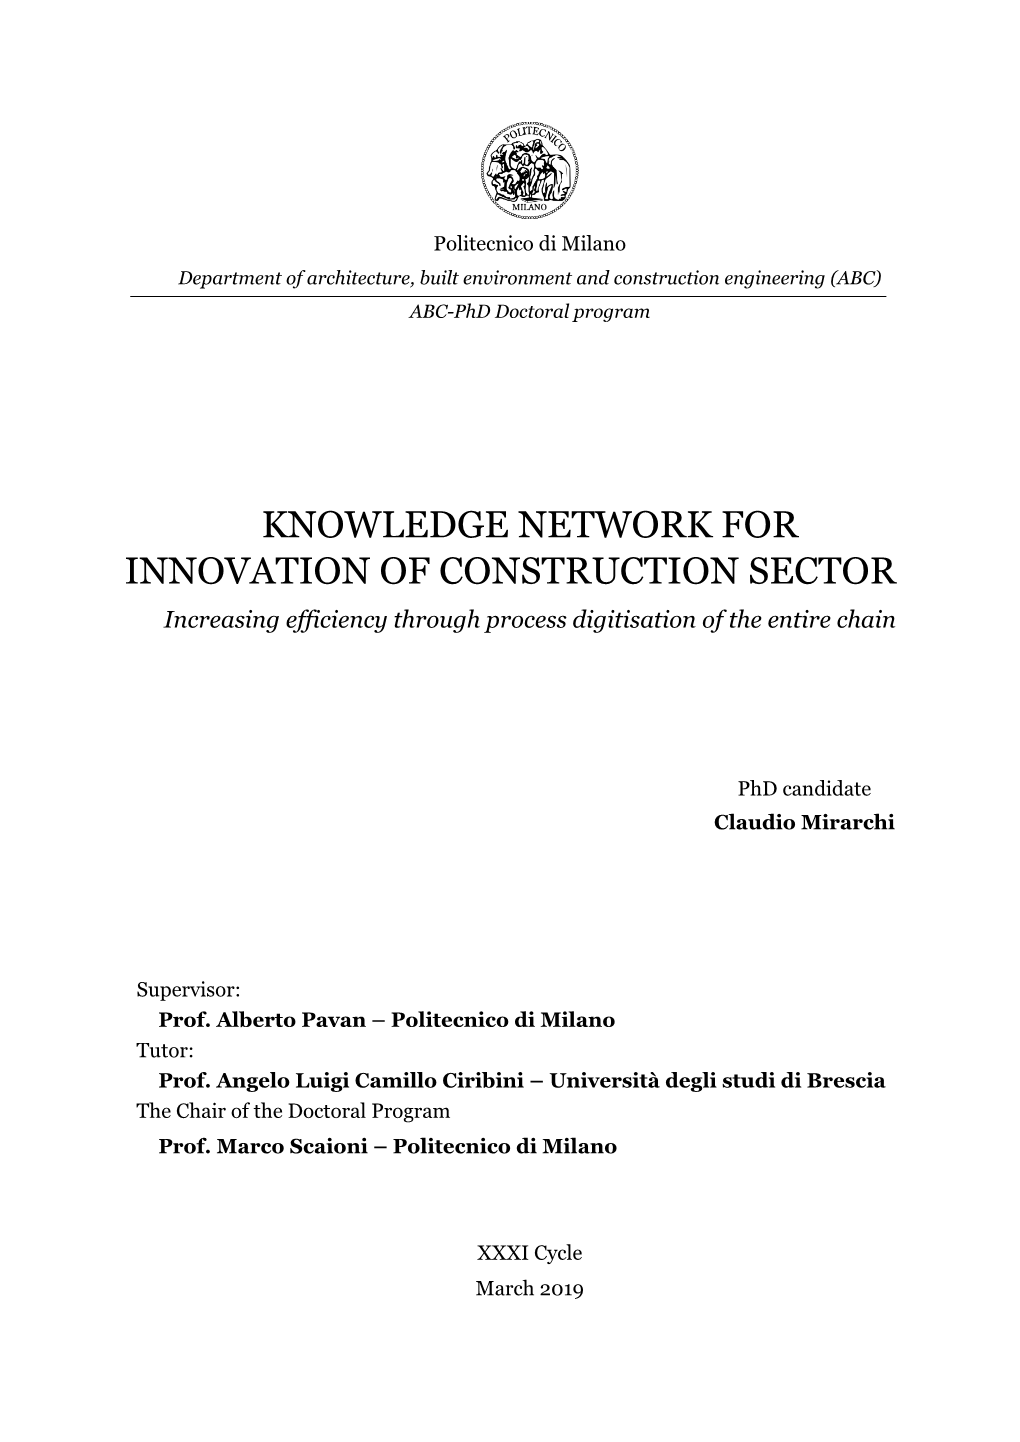 KNOWLEDGE NETWORK for INNOVATION of CONSTRUCTION SECTOR Increasing Efficiency Through Process Digitisation of the Entire Chain